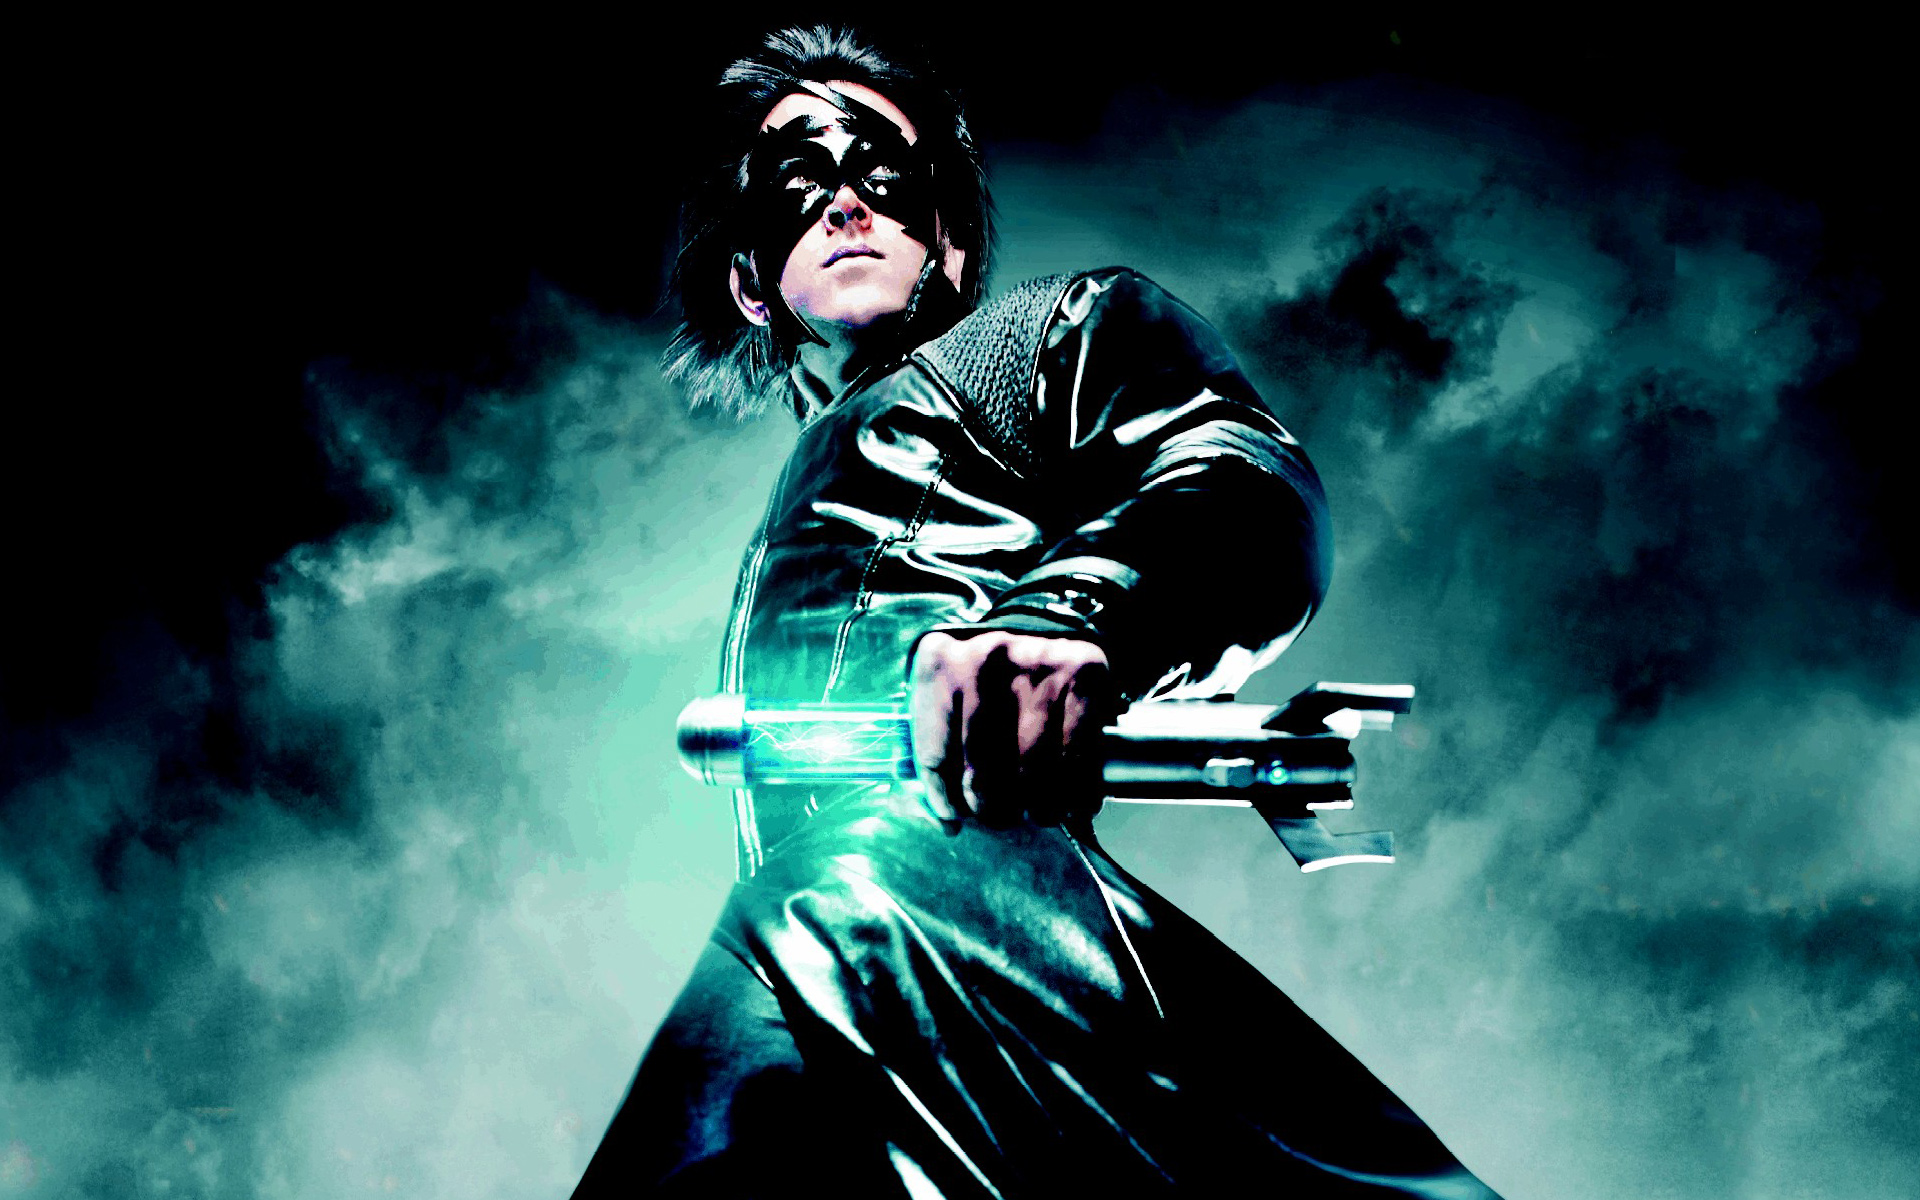 Krrish 3 Full Hd Background Wallpapers Collection - Krrish 3 - HD Wallpaper 